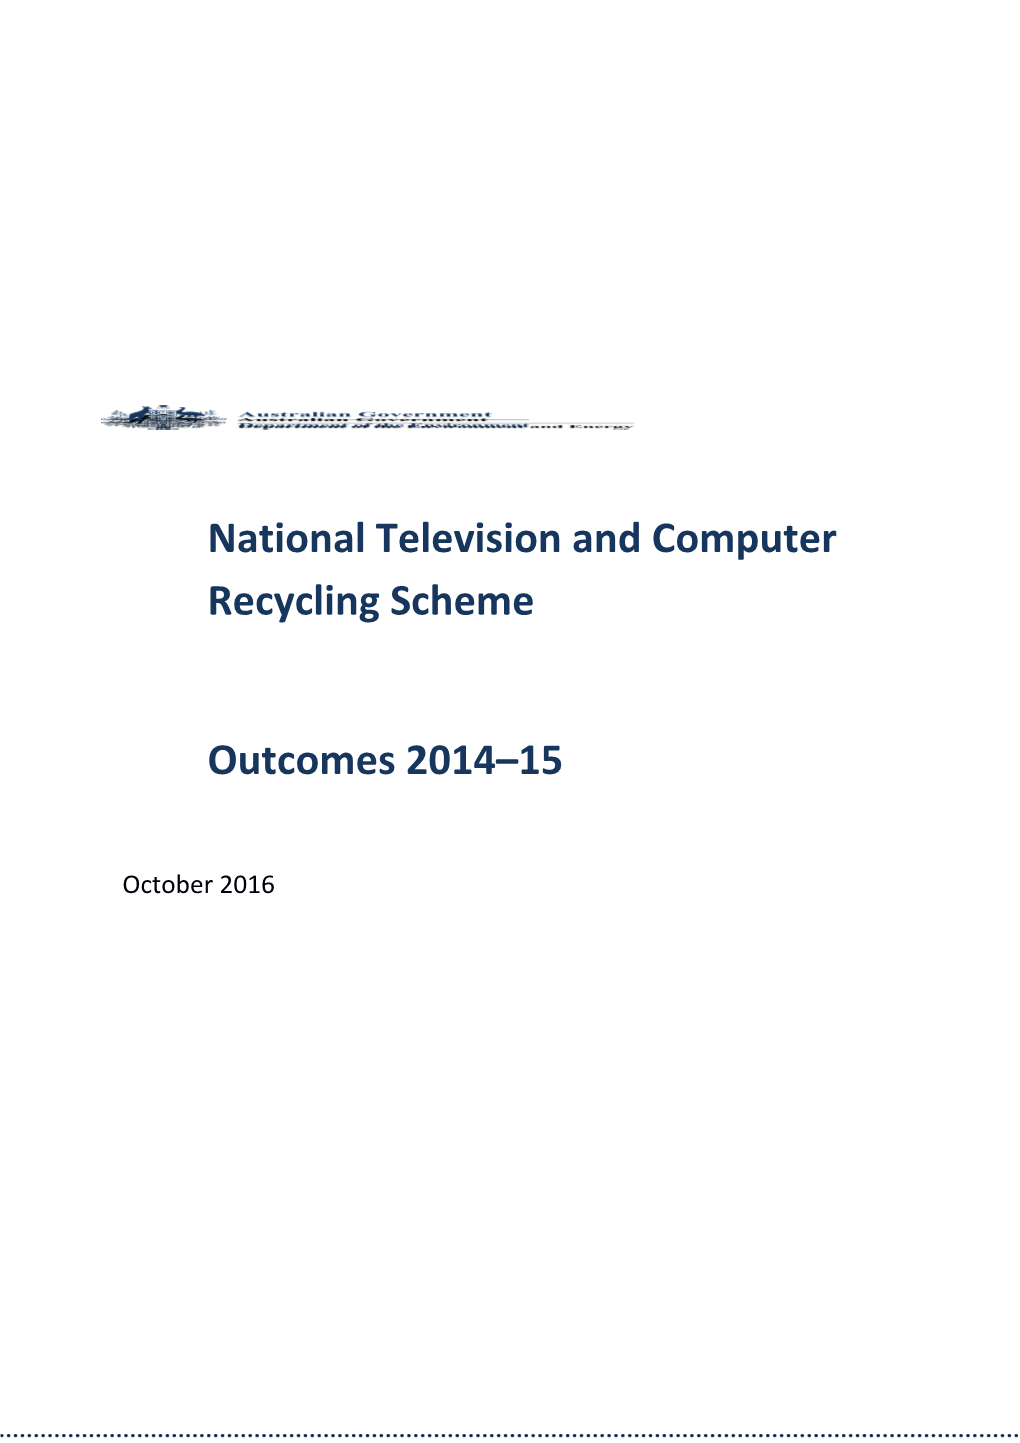 National Television and Computer Recycling Scheme Outcomes 2014 15